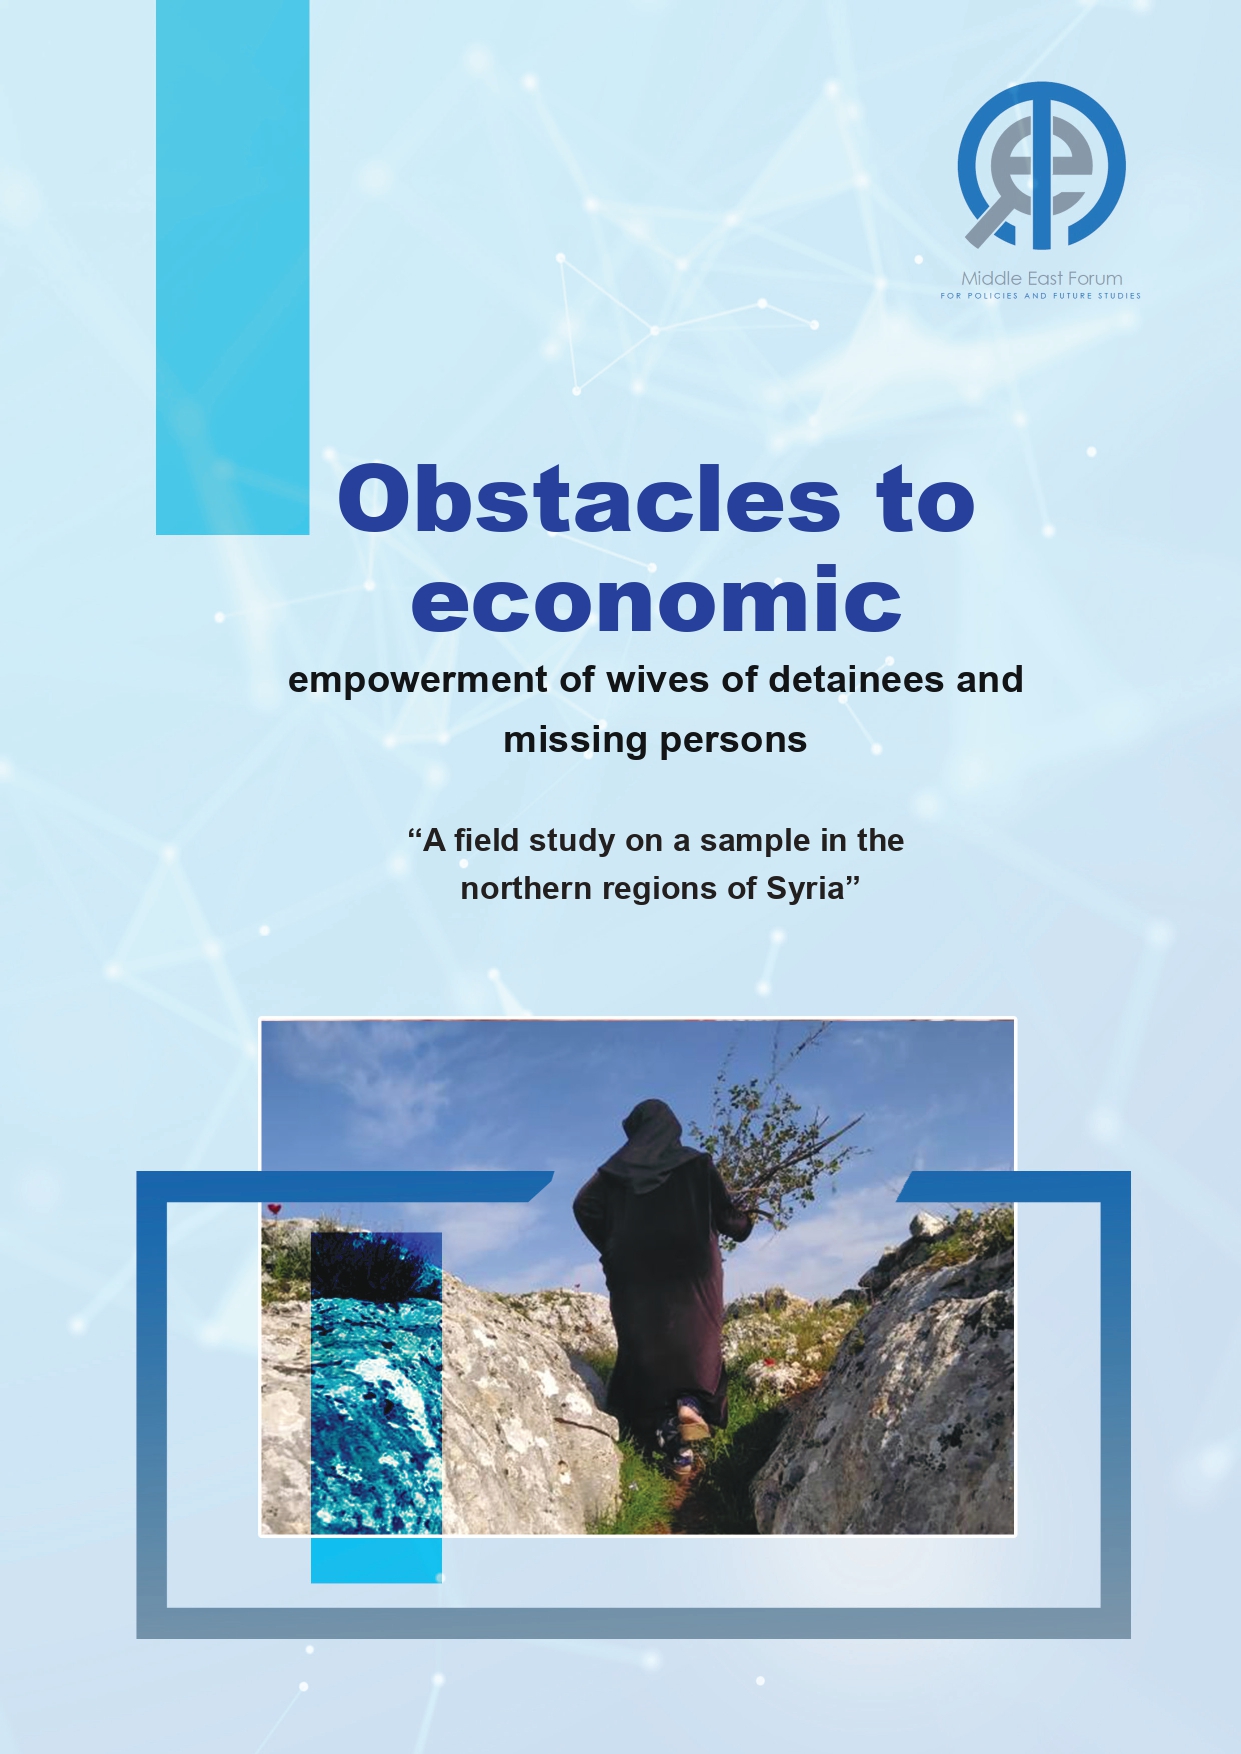 Obstacles to economic empowerment of wives of detainees and missing persons - A field study on a sample in the northern regions of Syria